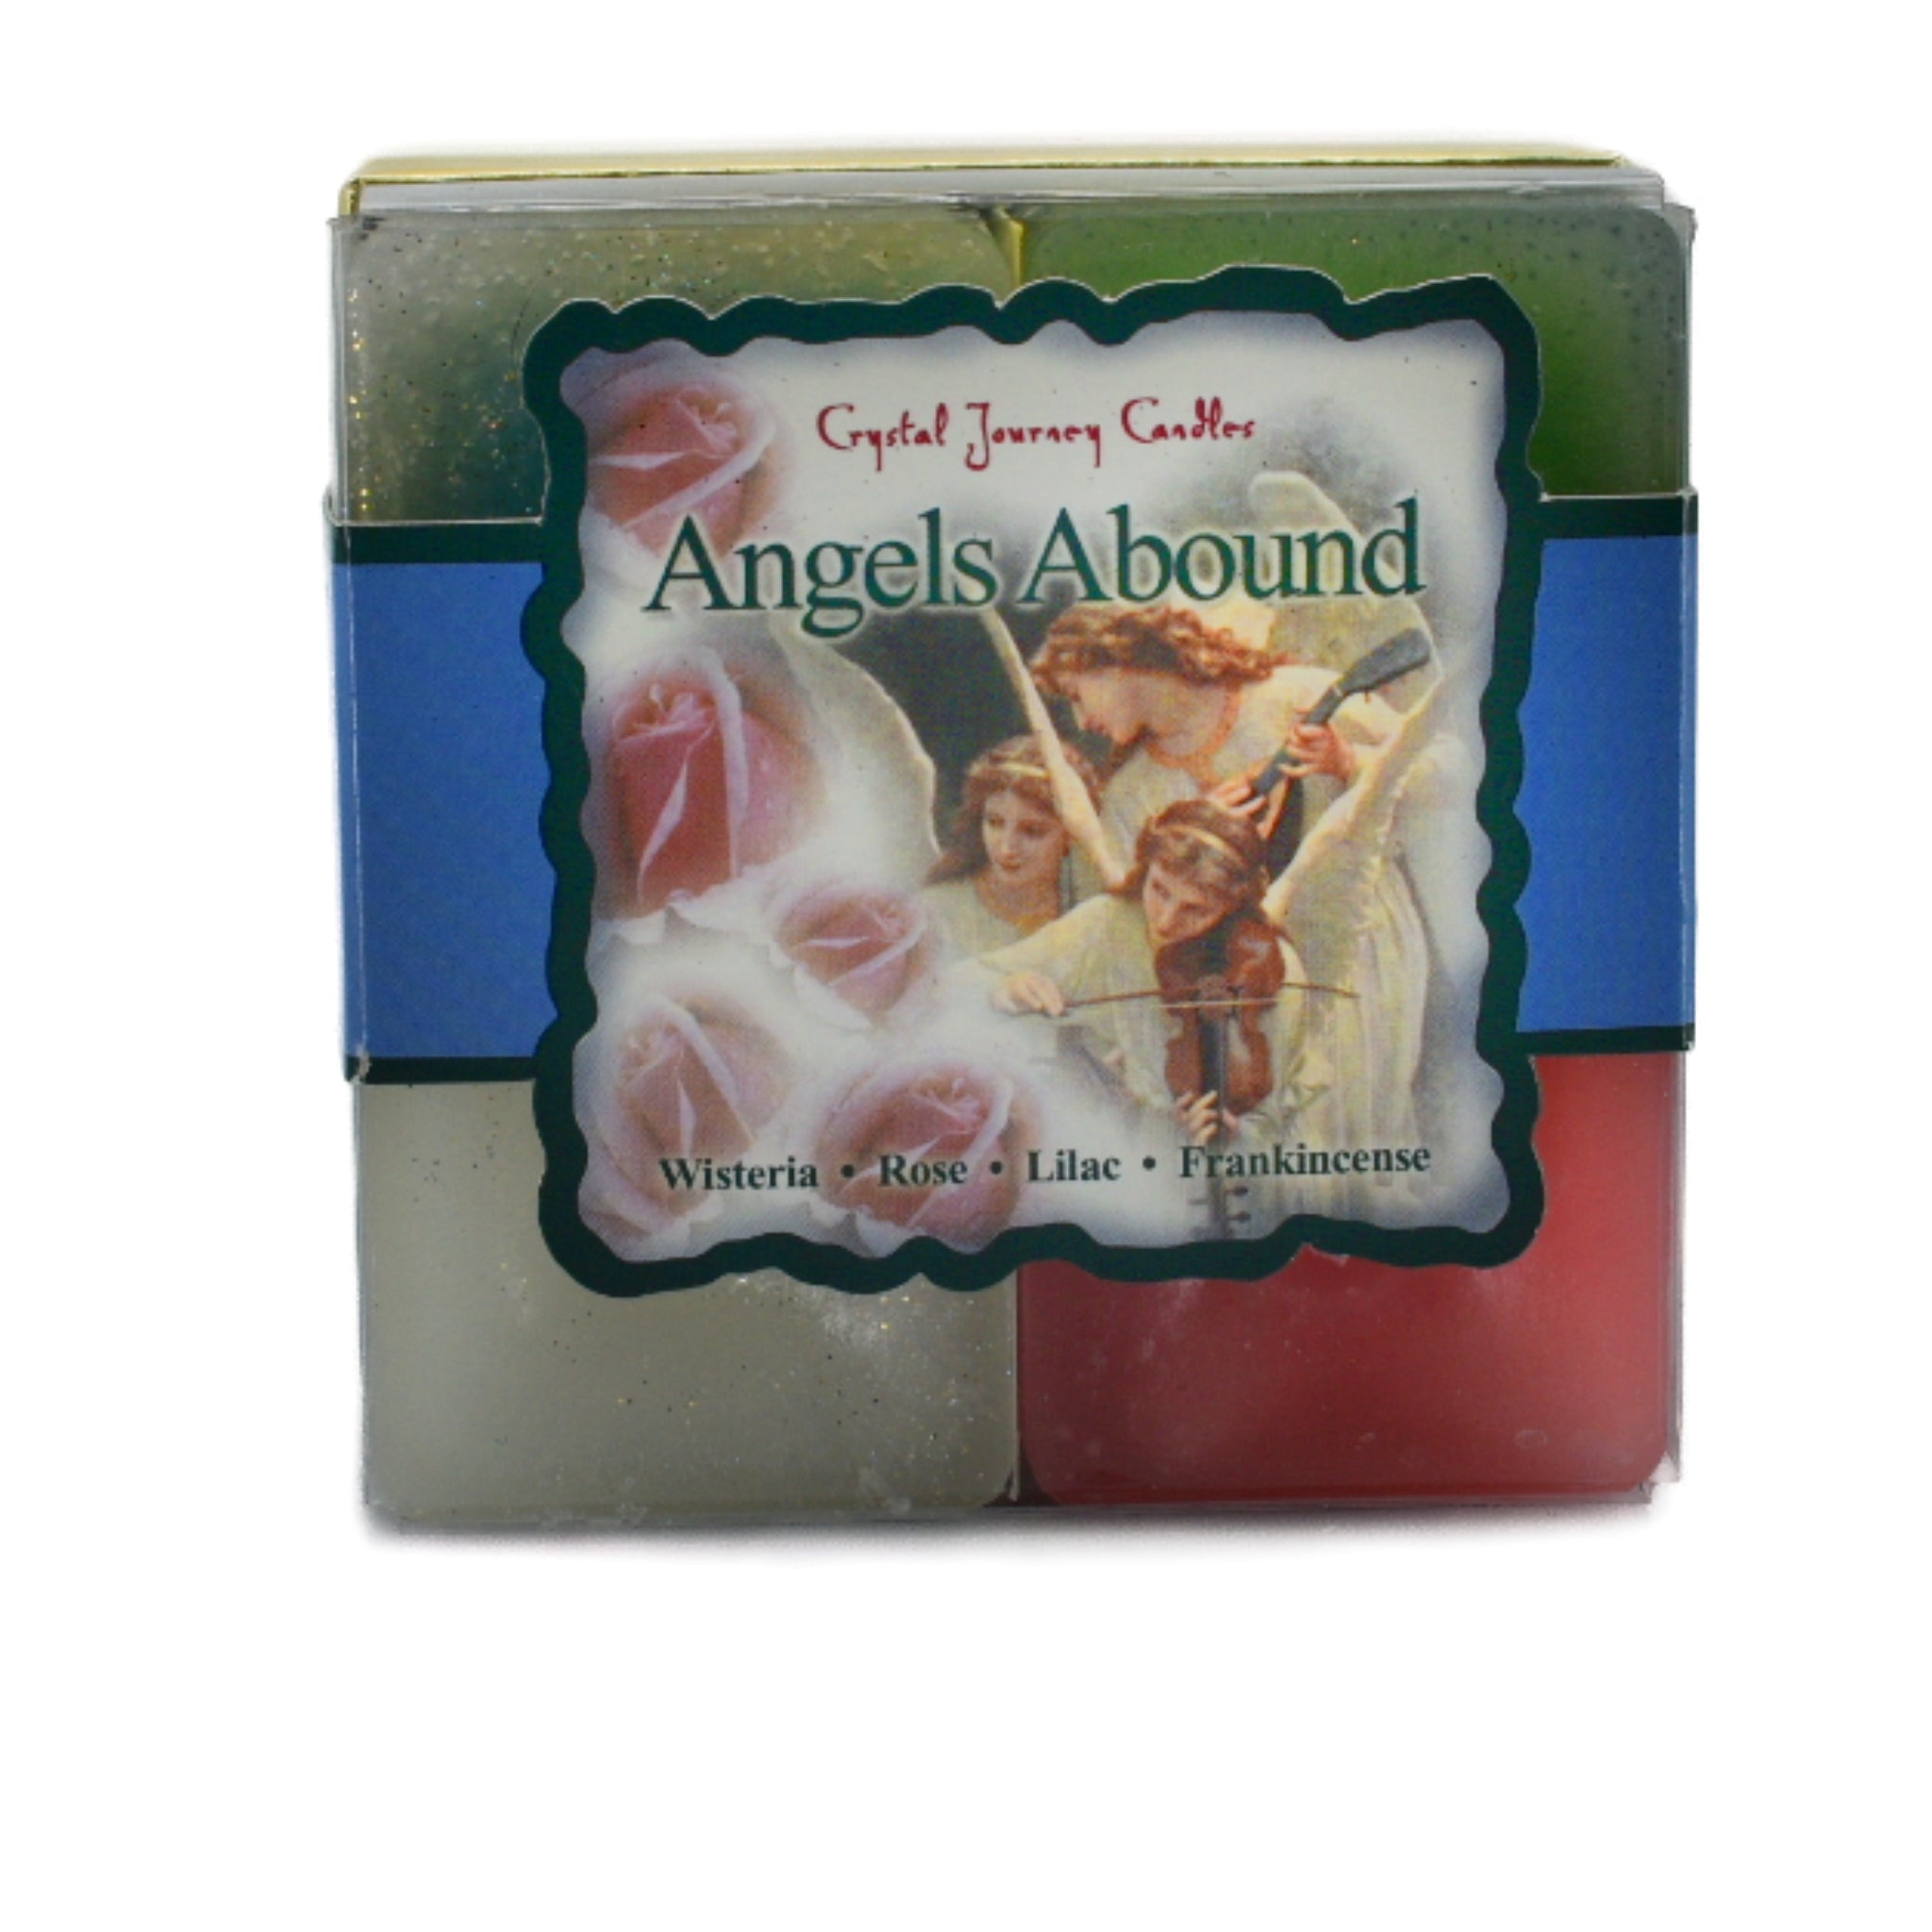 Angels Abound Square Pack Candles has 4 varieties: Wisteria - Healing, Frankincense - Protection, Rose - Love, and Lilac - Creativity.  Gather the angels with these 4 beauties.